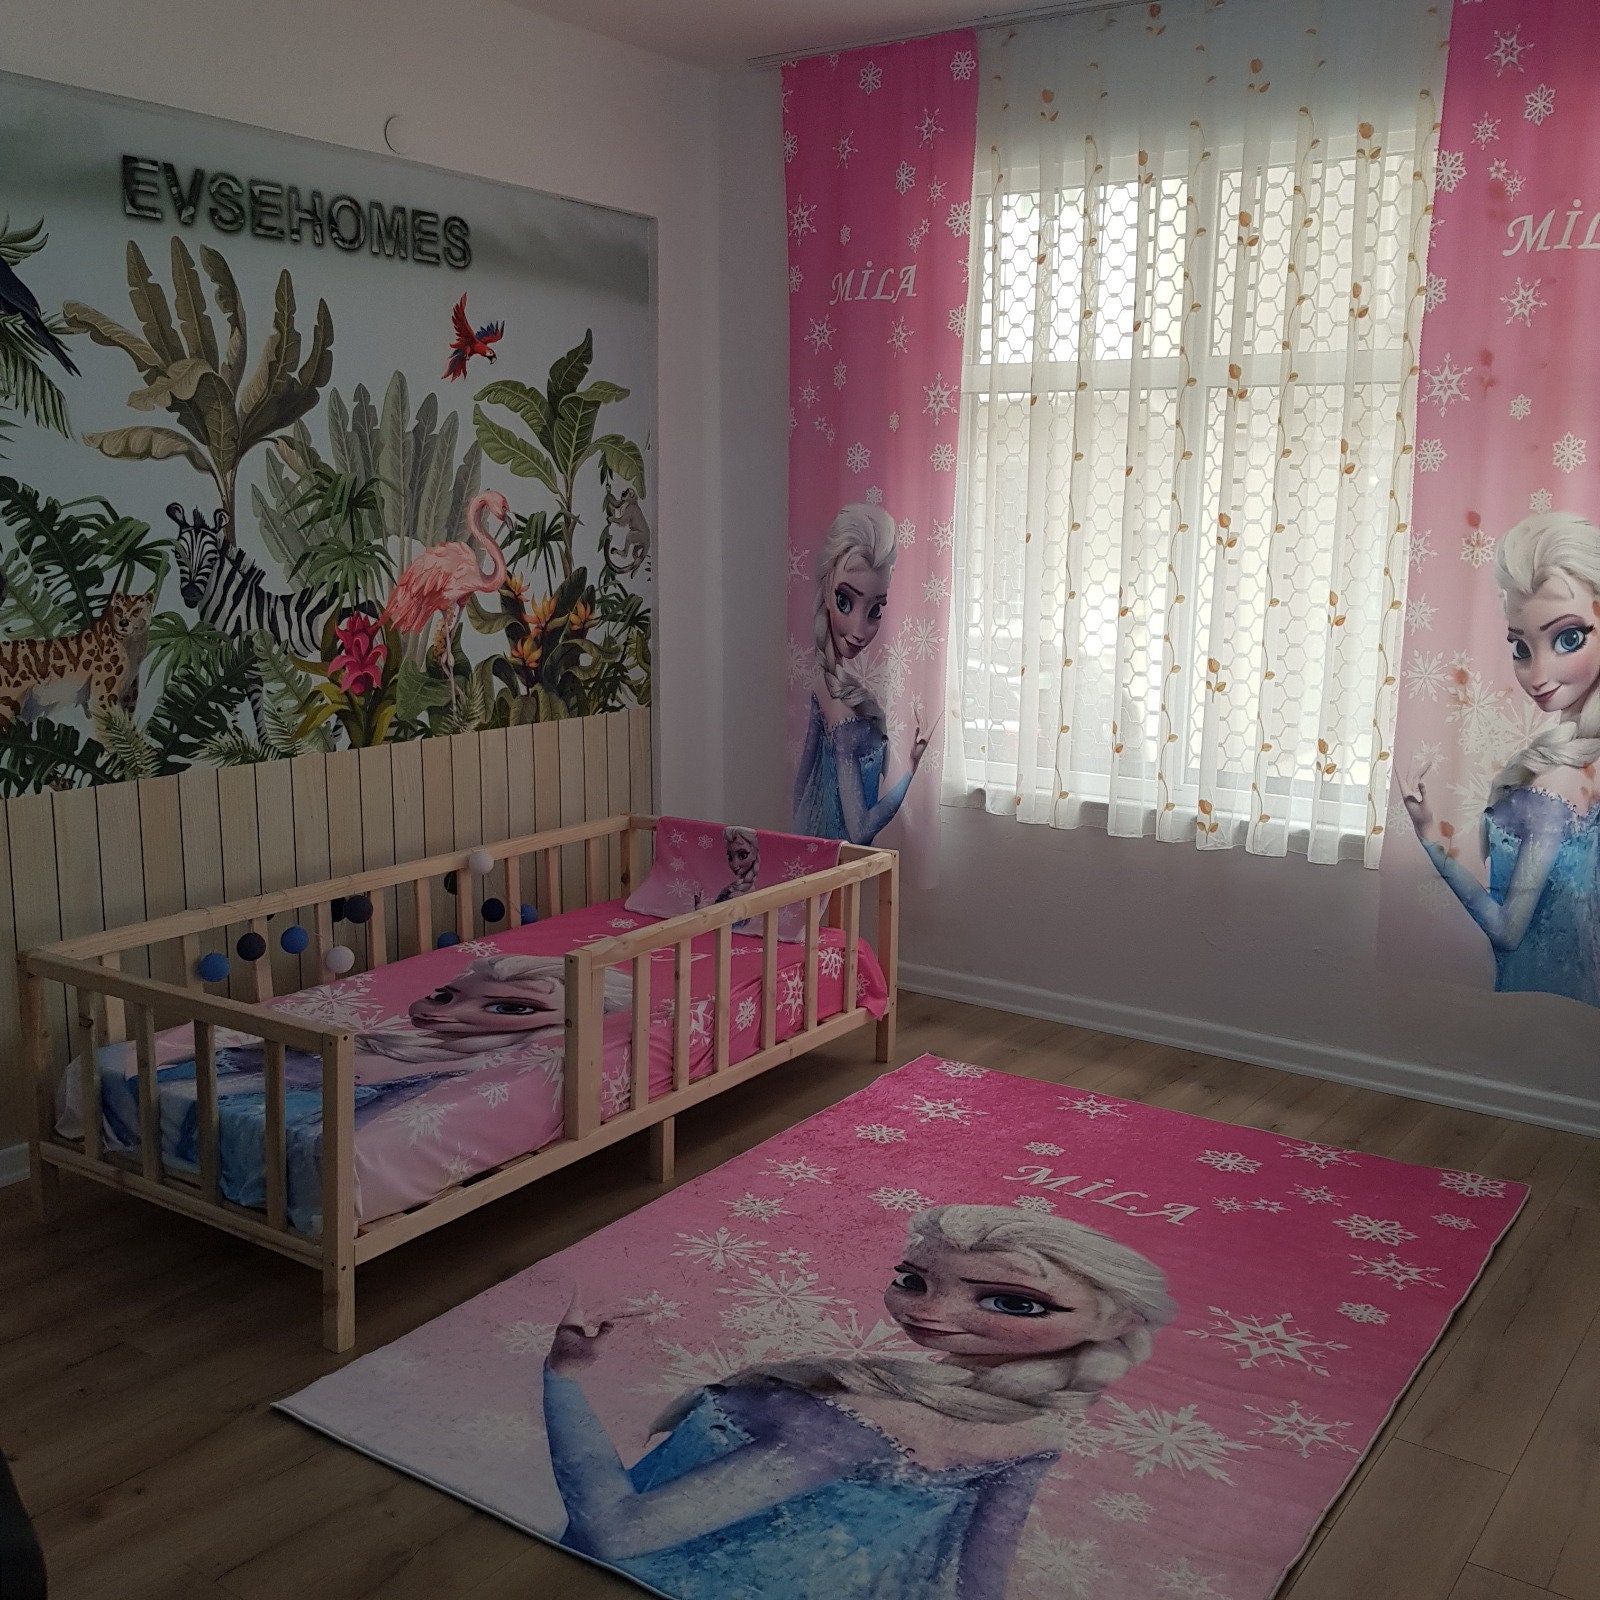 Discover Adorable Cartoon Pattern Girl Personalized Kids Room Rug - Anti-Allergic and Customized for Baby Nursery Room with Non-Slip Backing